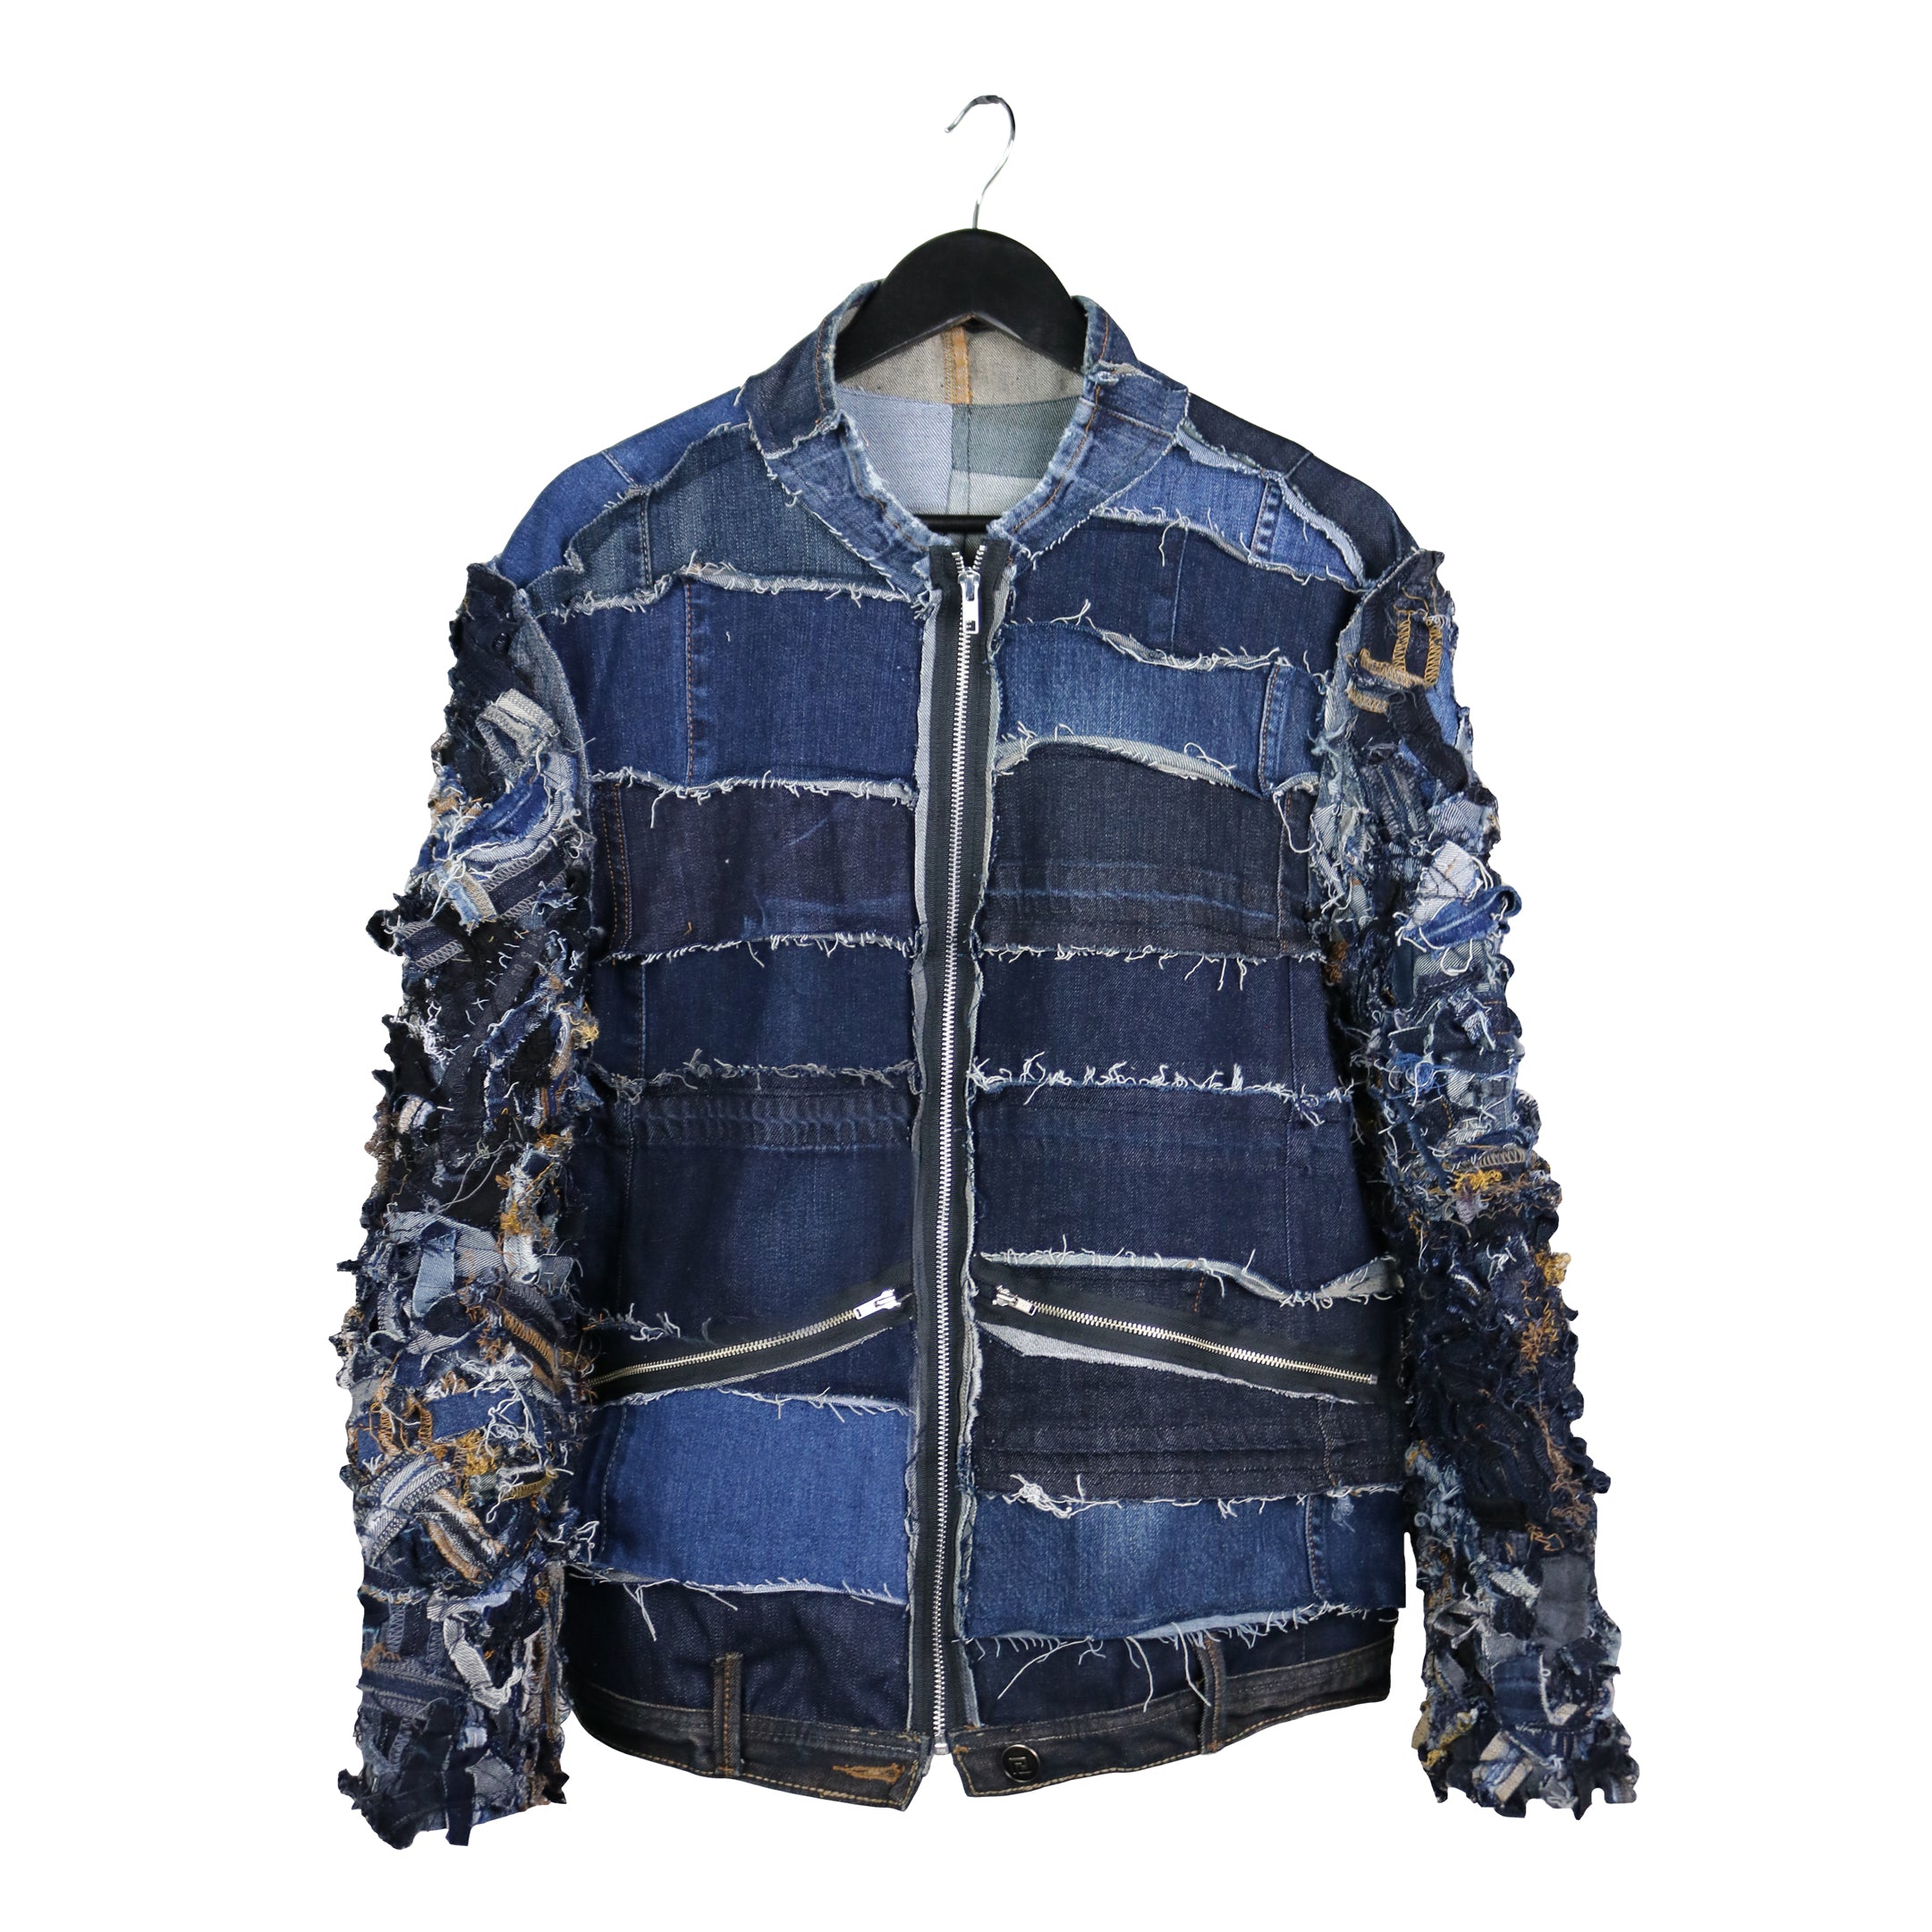 Archive 00's L.G.B Decayed Denim Jacket | keeen.co.th